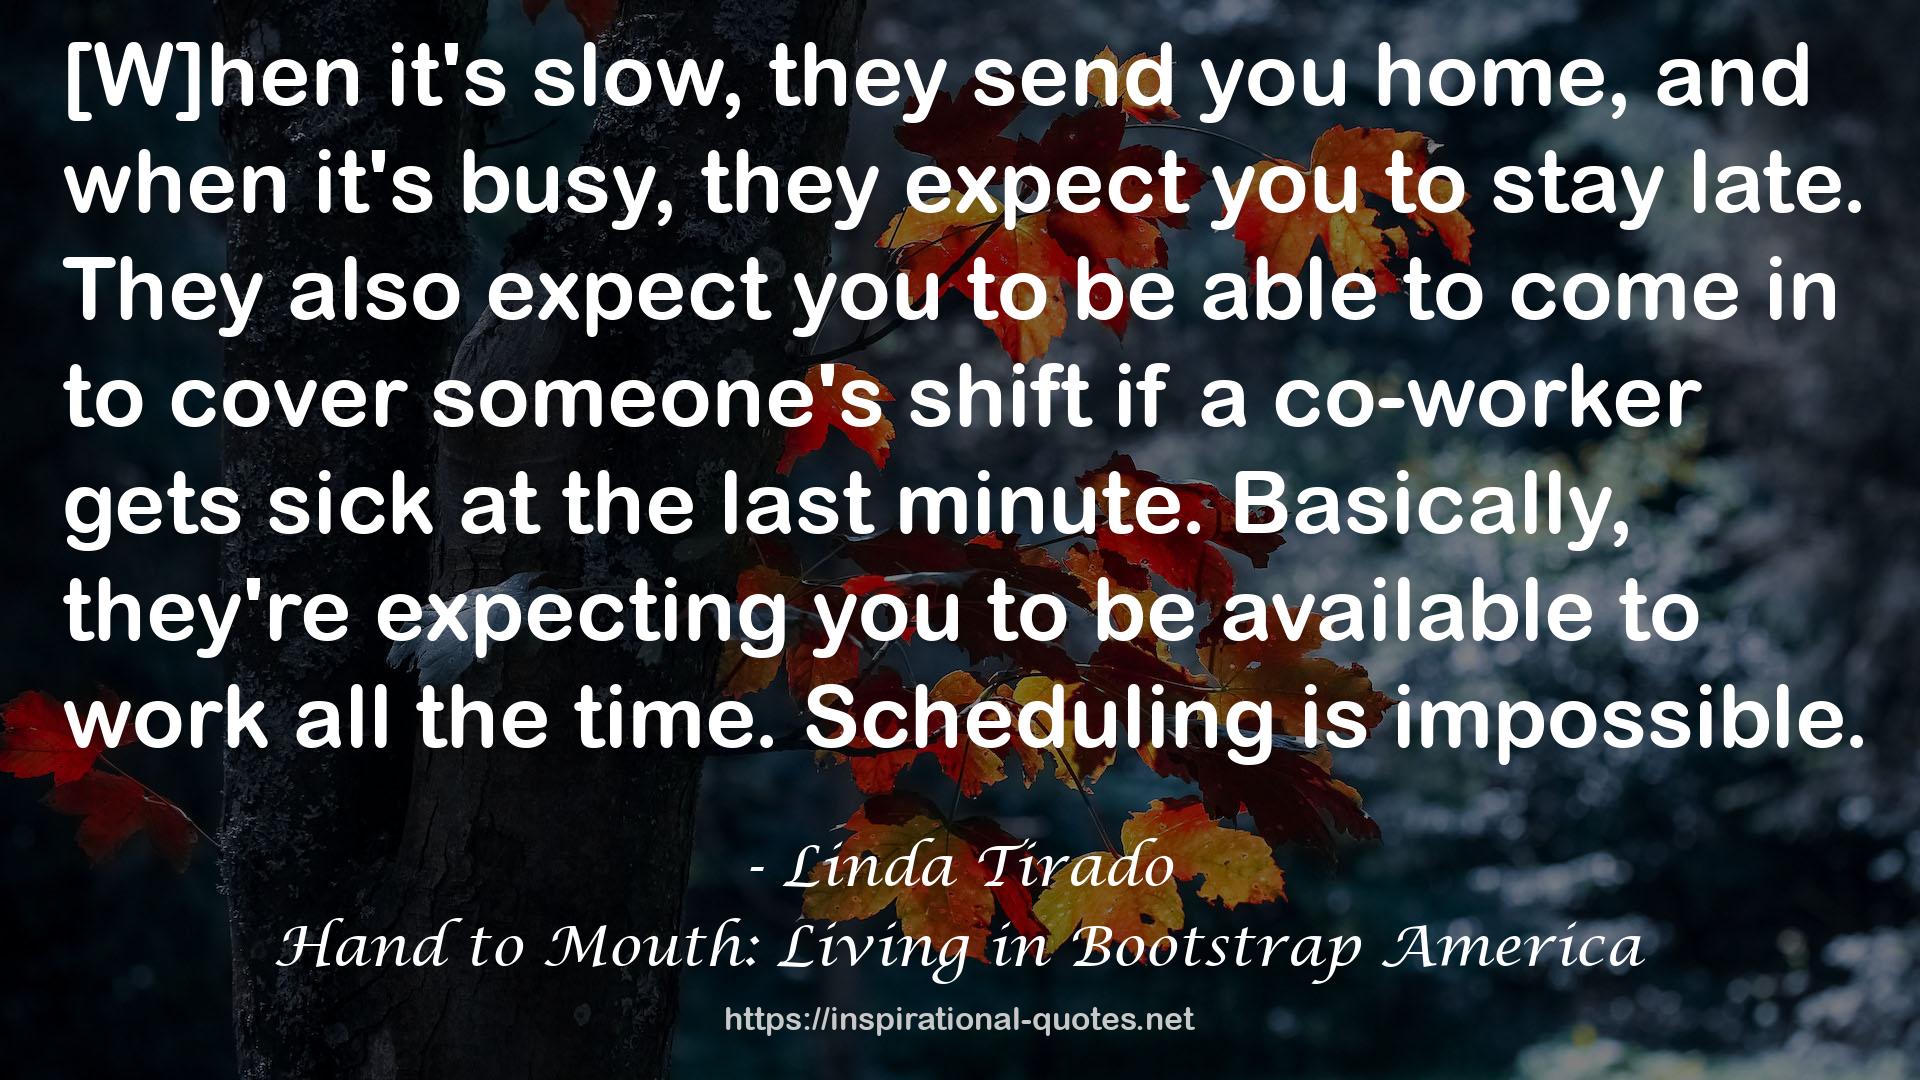 Hand to Mouth: Living in Bootstrap America QUOTES